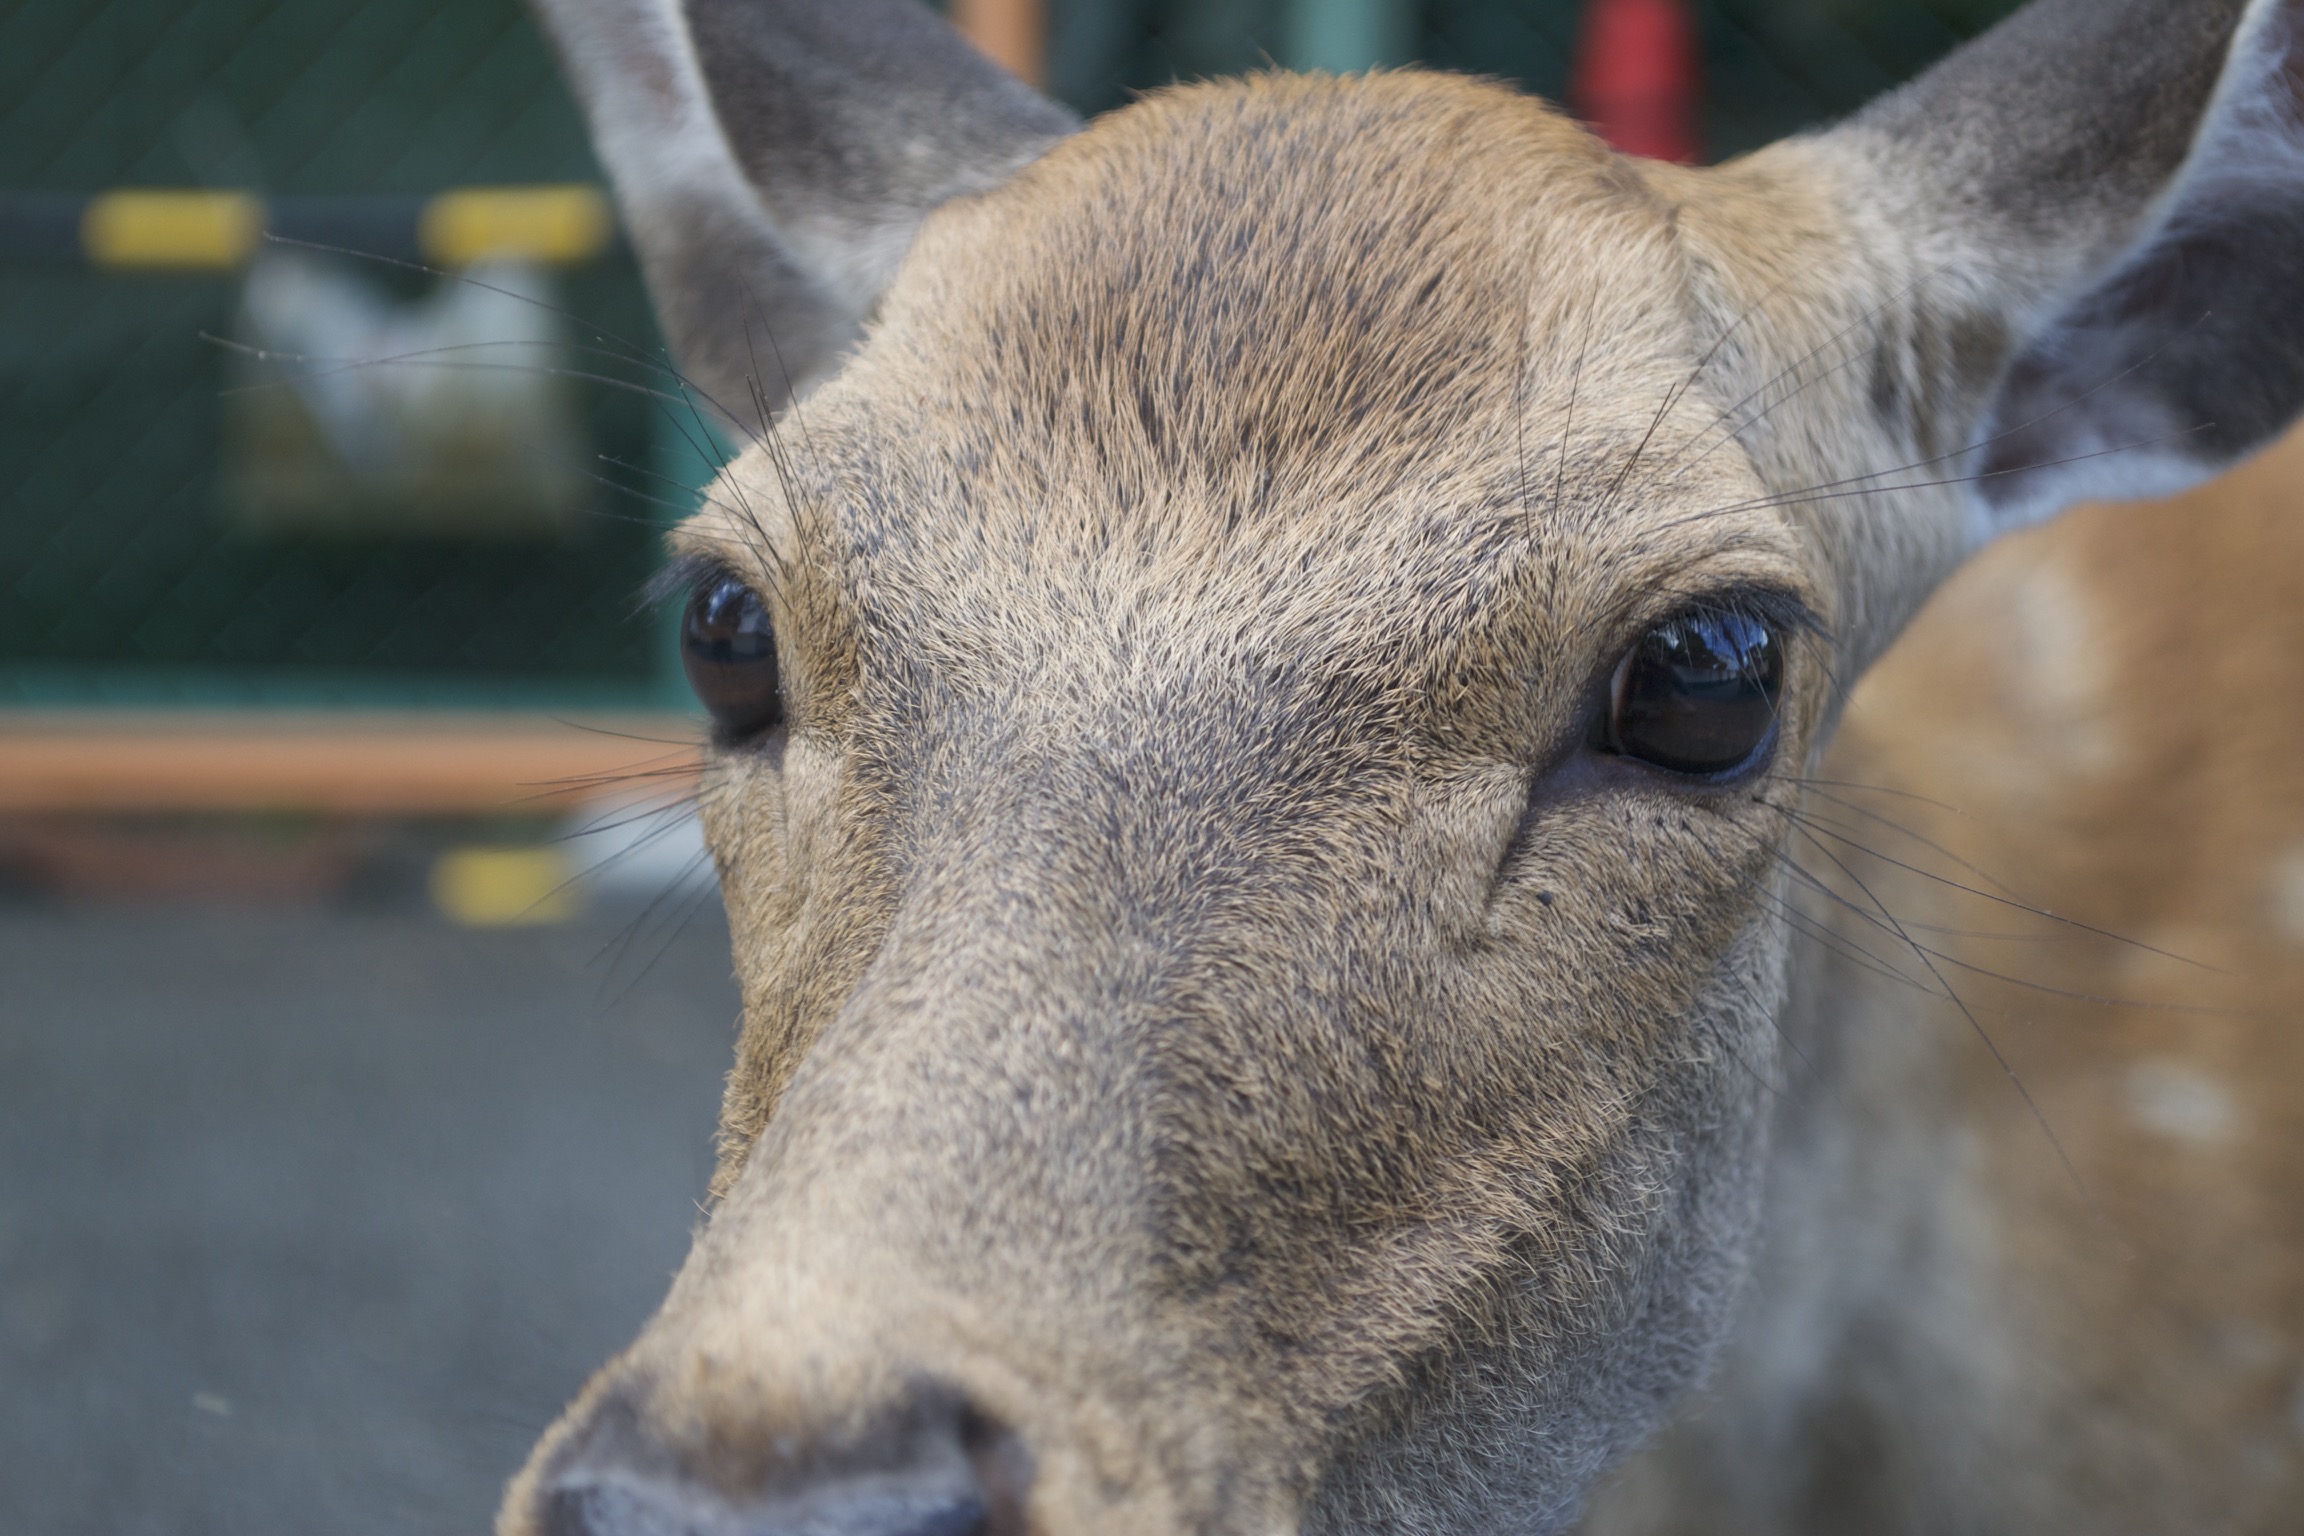 A close-up of a deer's snout and face